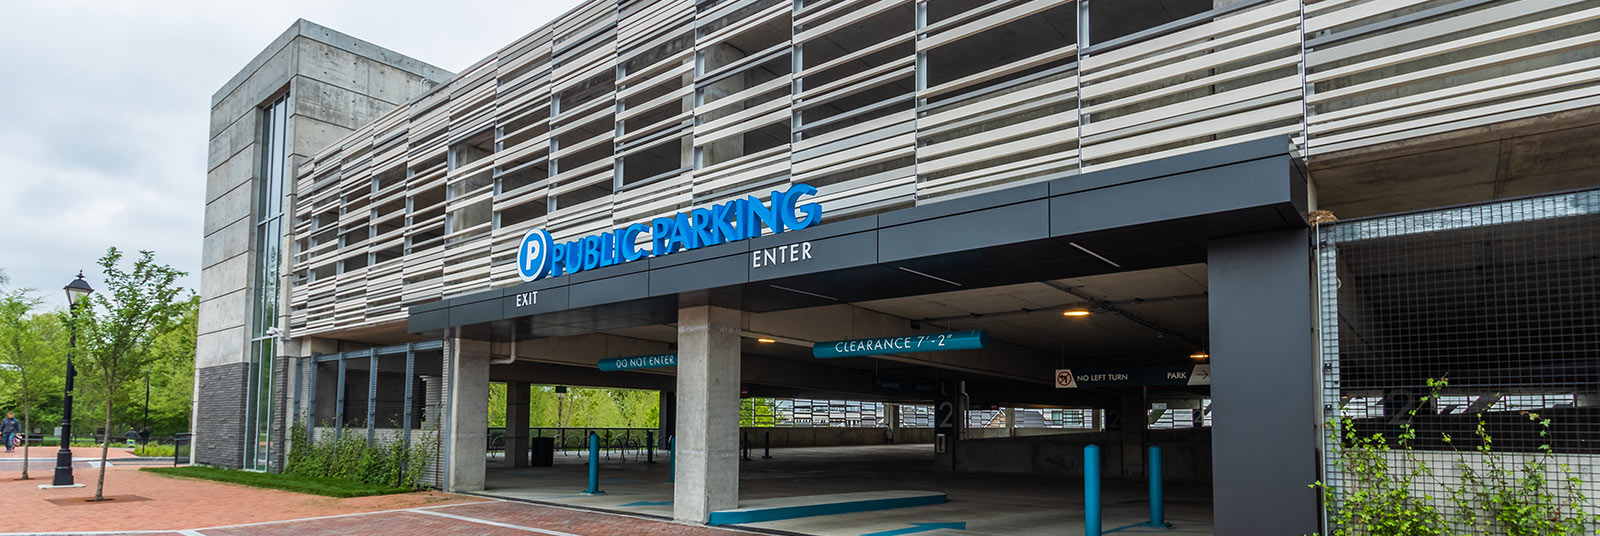 The west parking entrance at the Dublin Parking Garage in Dublin, Ohio.